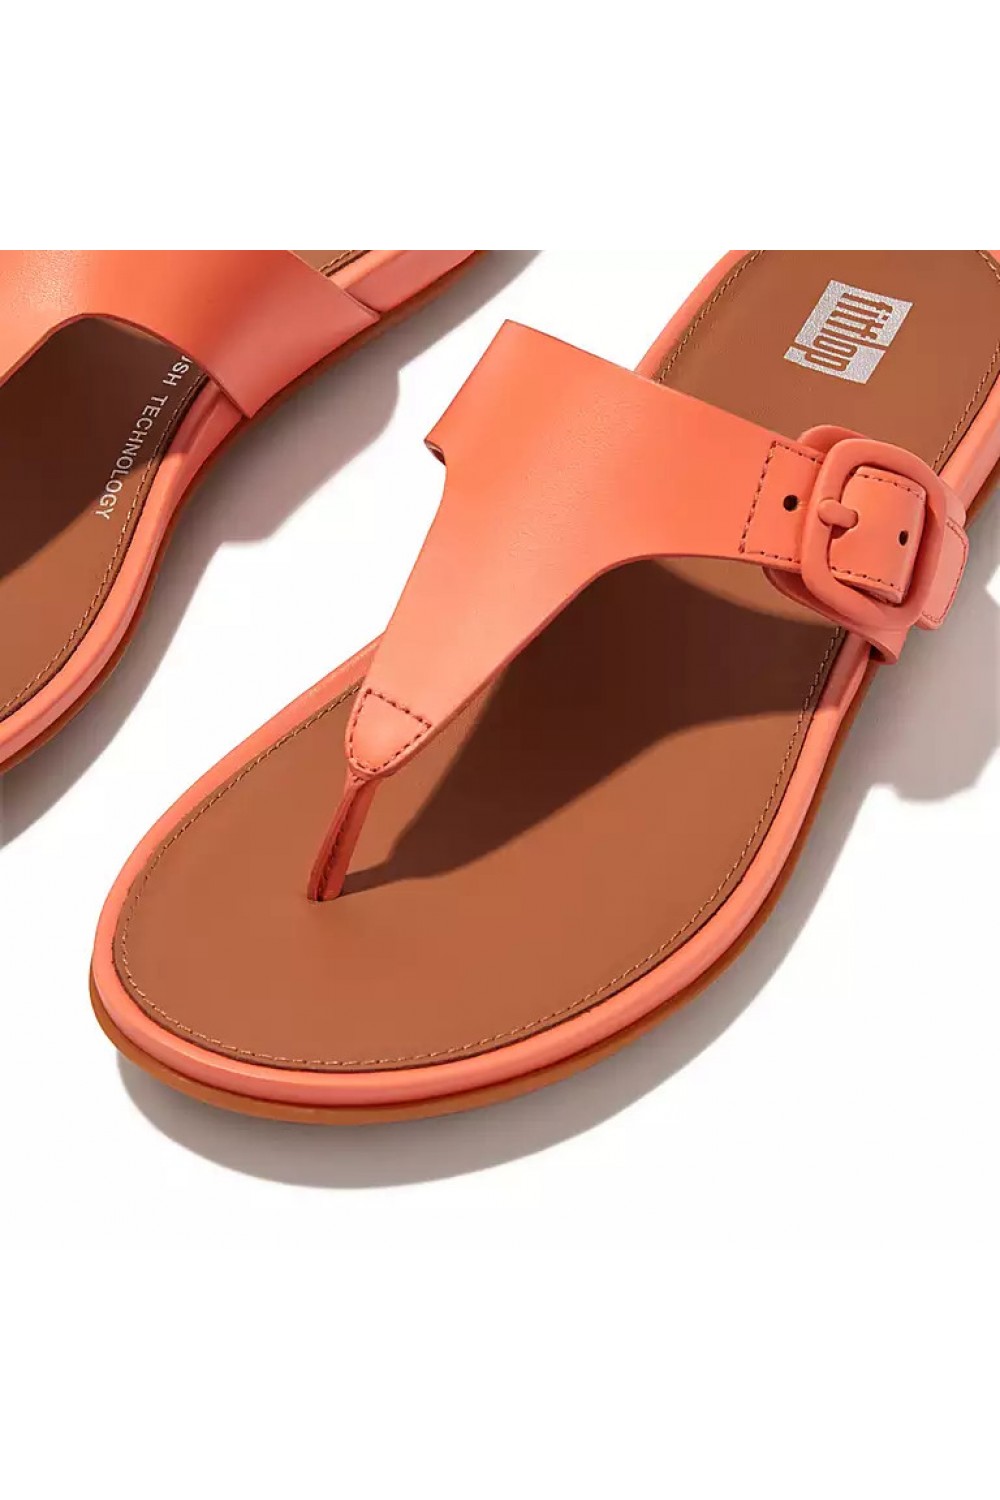 Fitflop GRACIE Matt-Buckle Leather Toe-Post Sandals Sunshine Coral